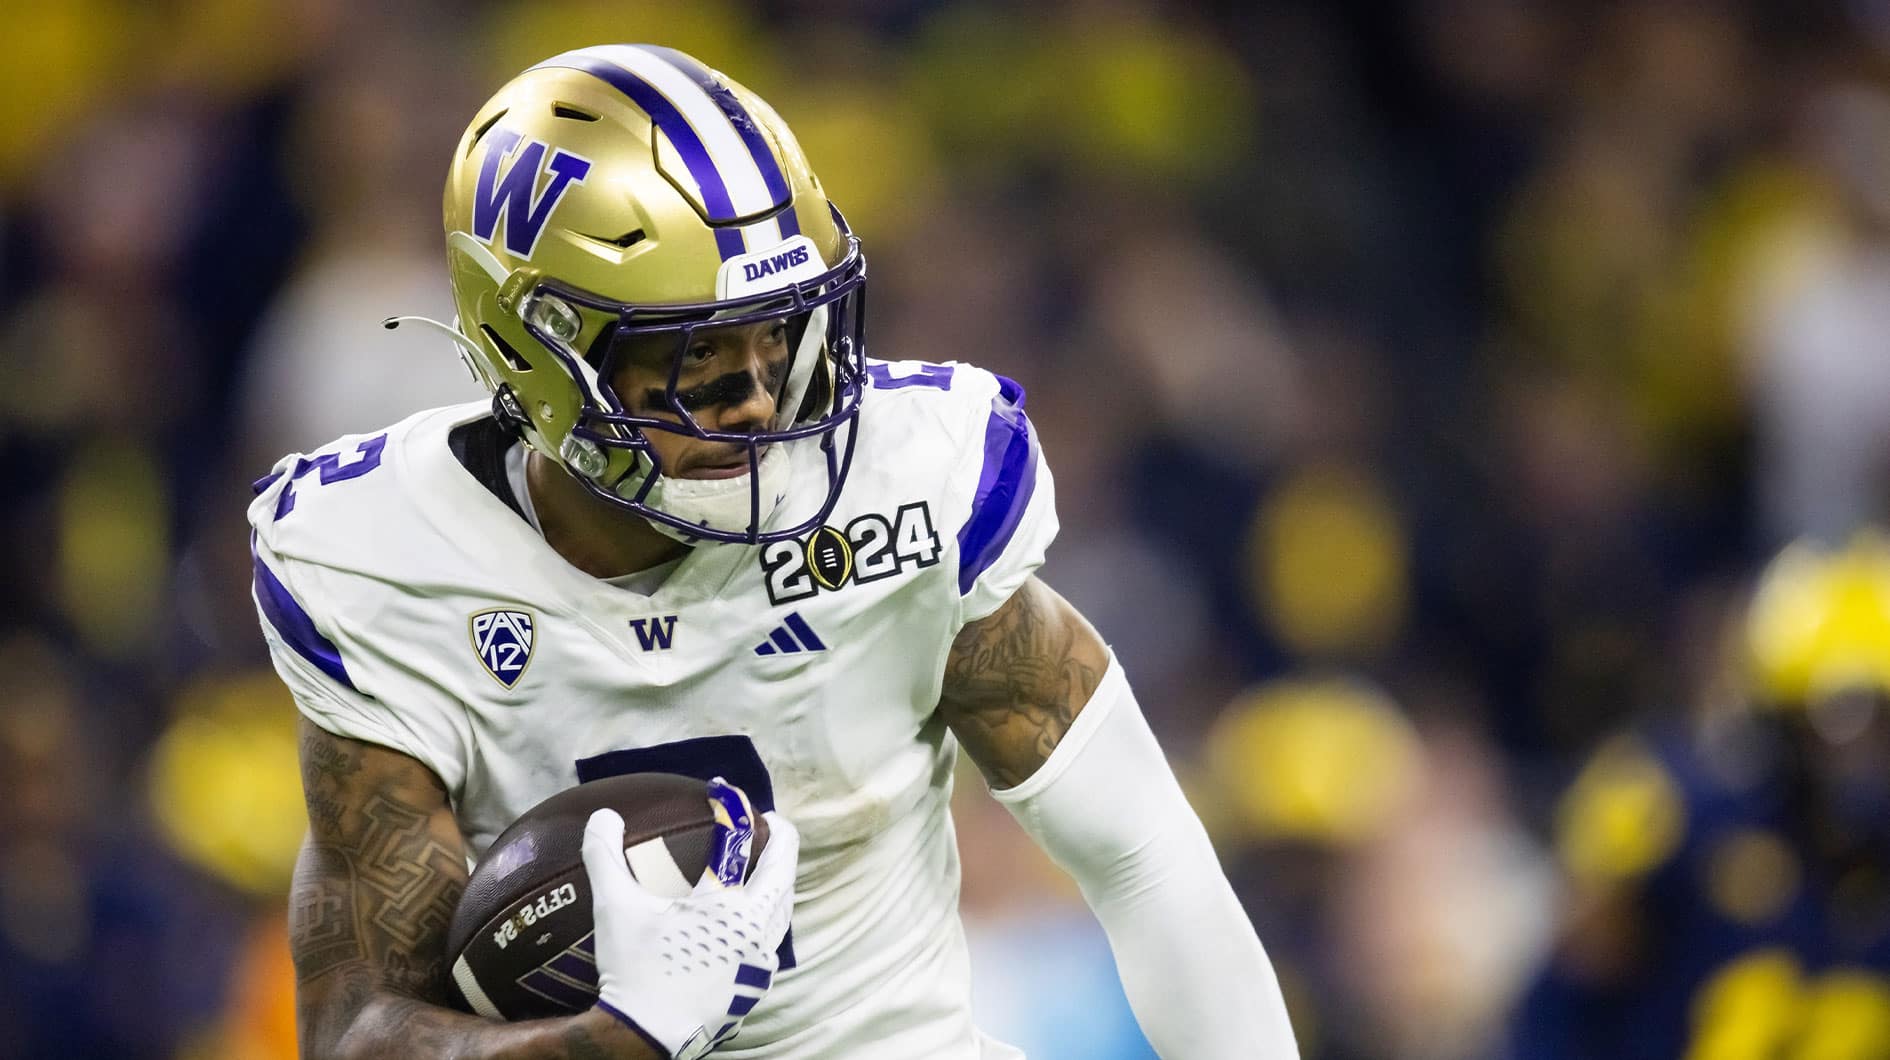 Washington Huskies wide receiver Ja'Lynn Polk (2) against the Michigan Wolverines during the 2024 College Football Playoff national championship game at NRG Stadium.